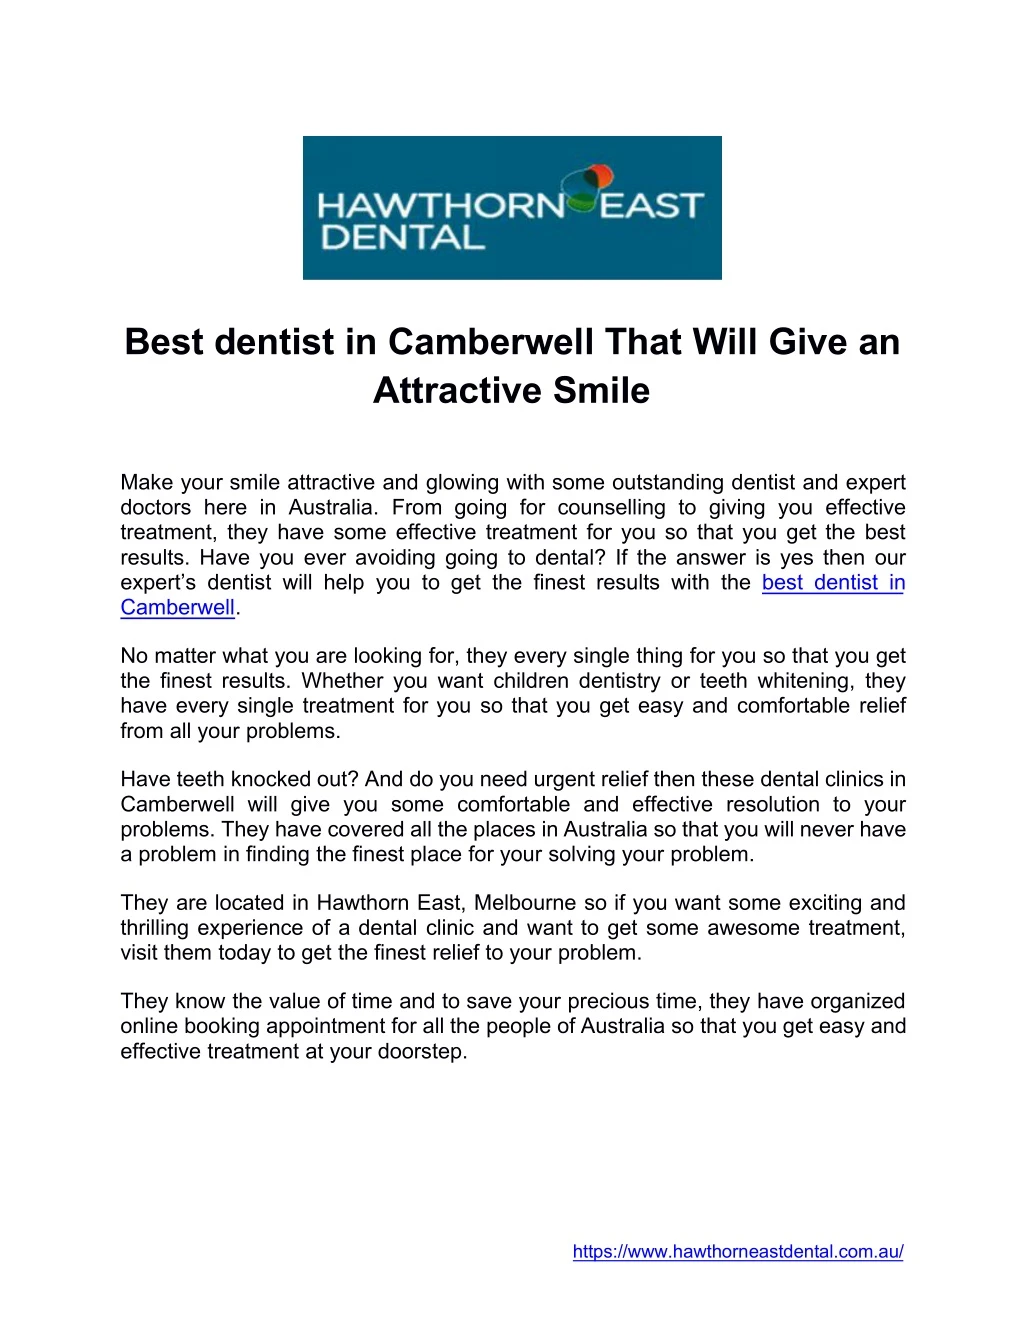 best dentist in camberwell that will give